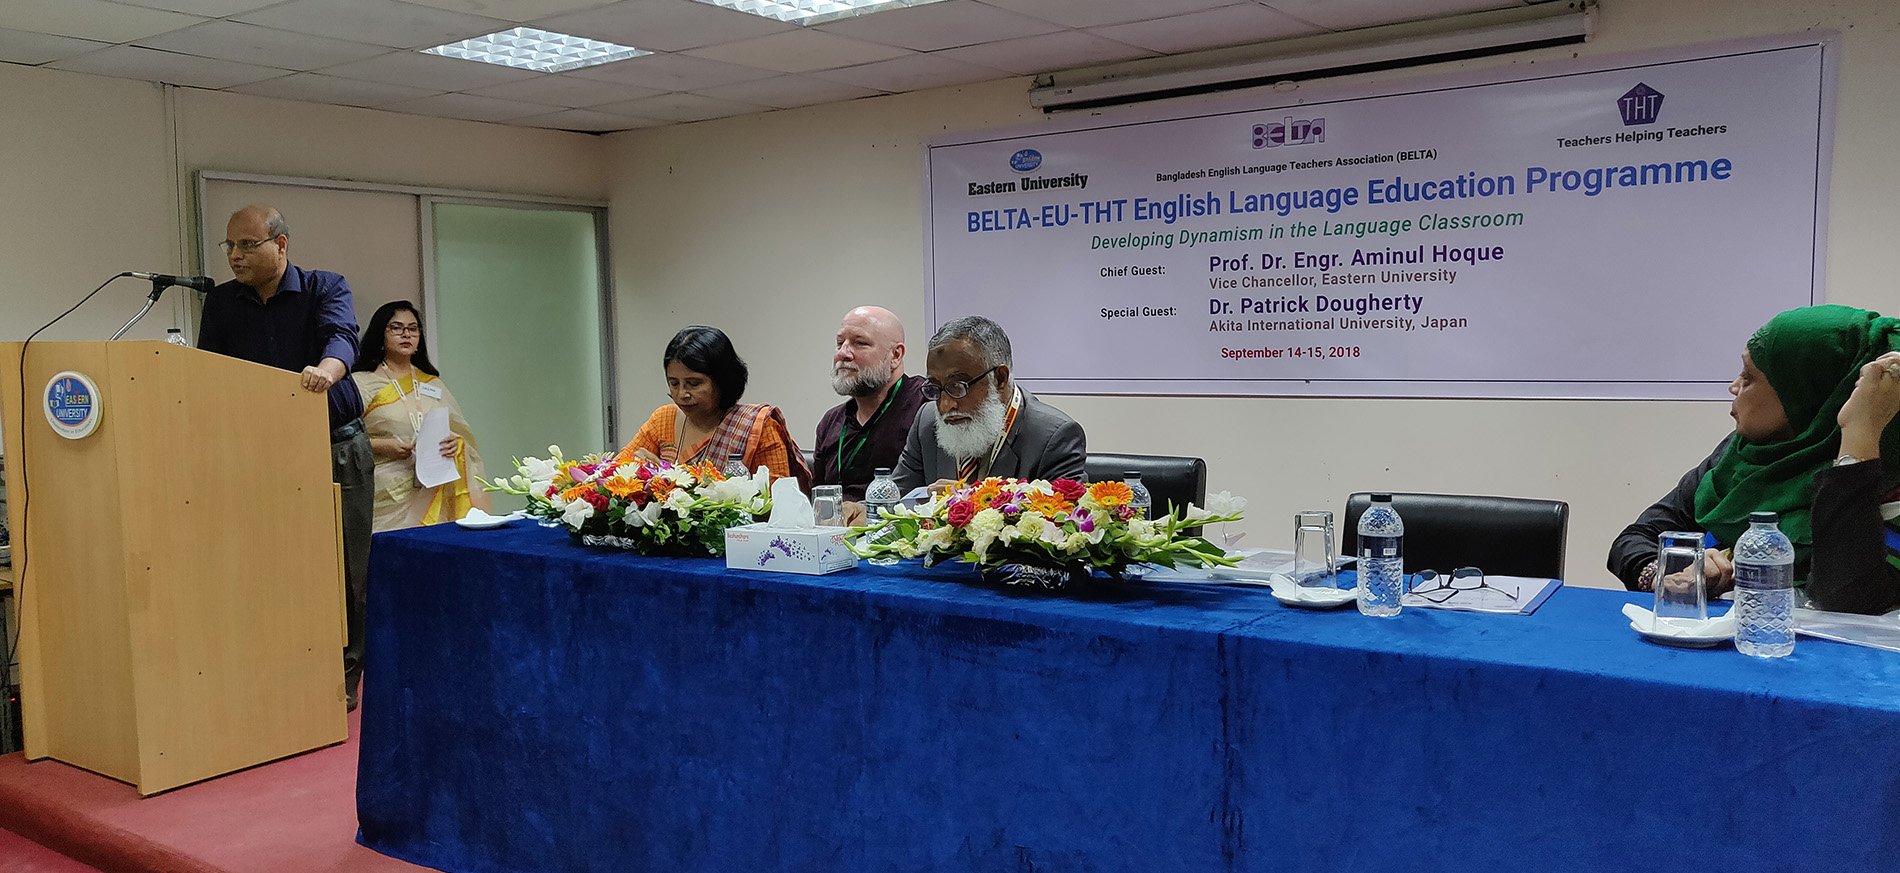 BELTA-EASTERN UNIVERSITY English Language Education Programme in Collaboration with THT